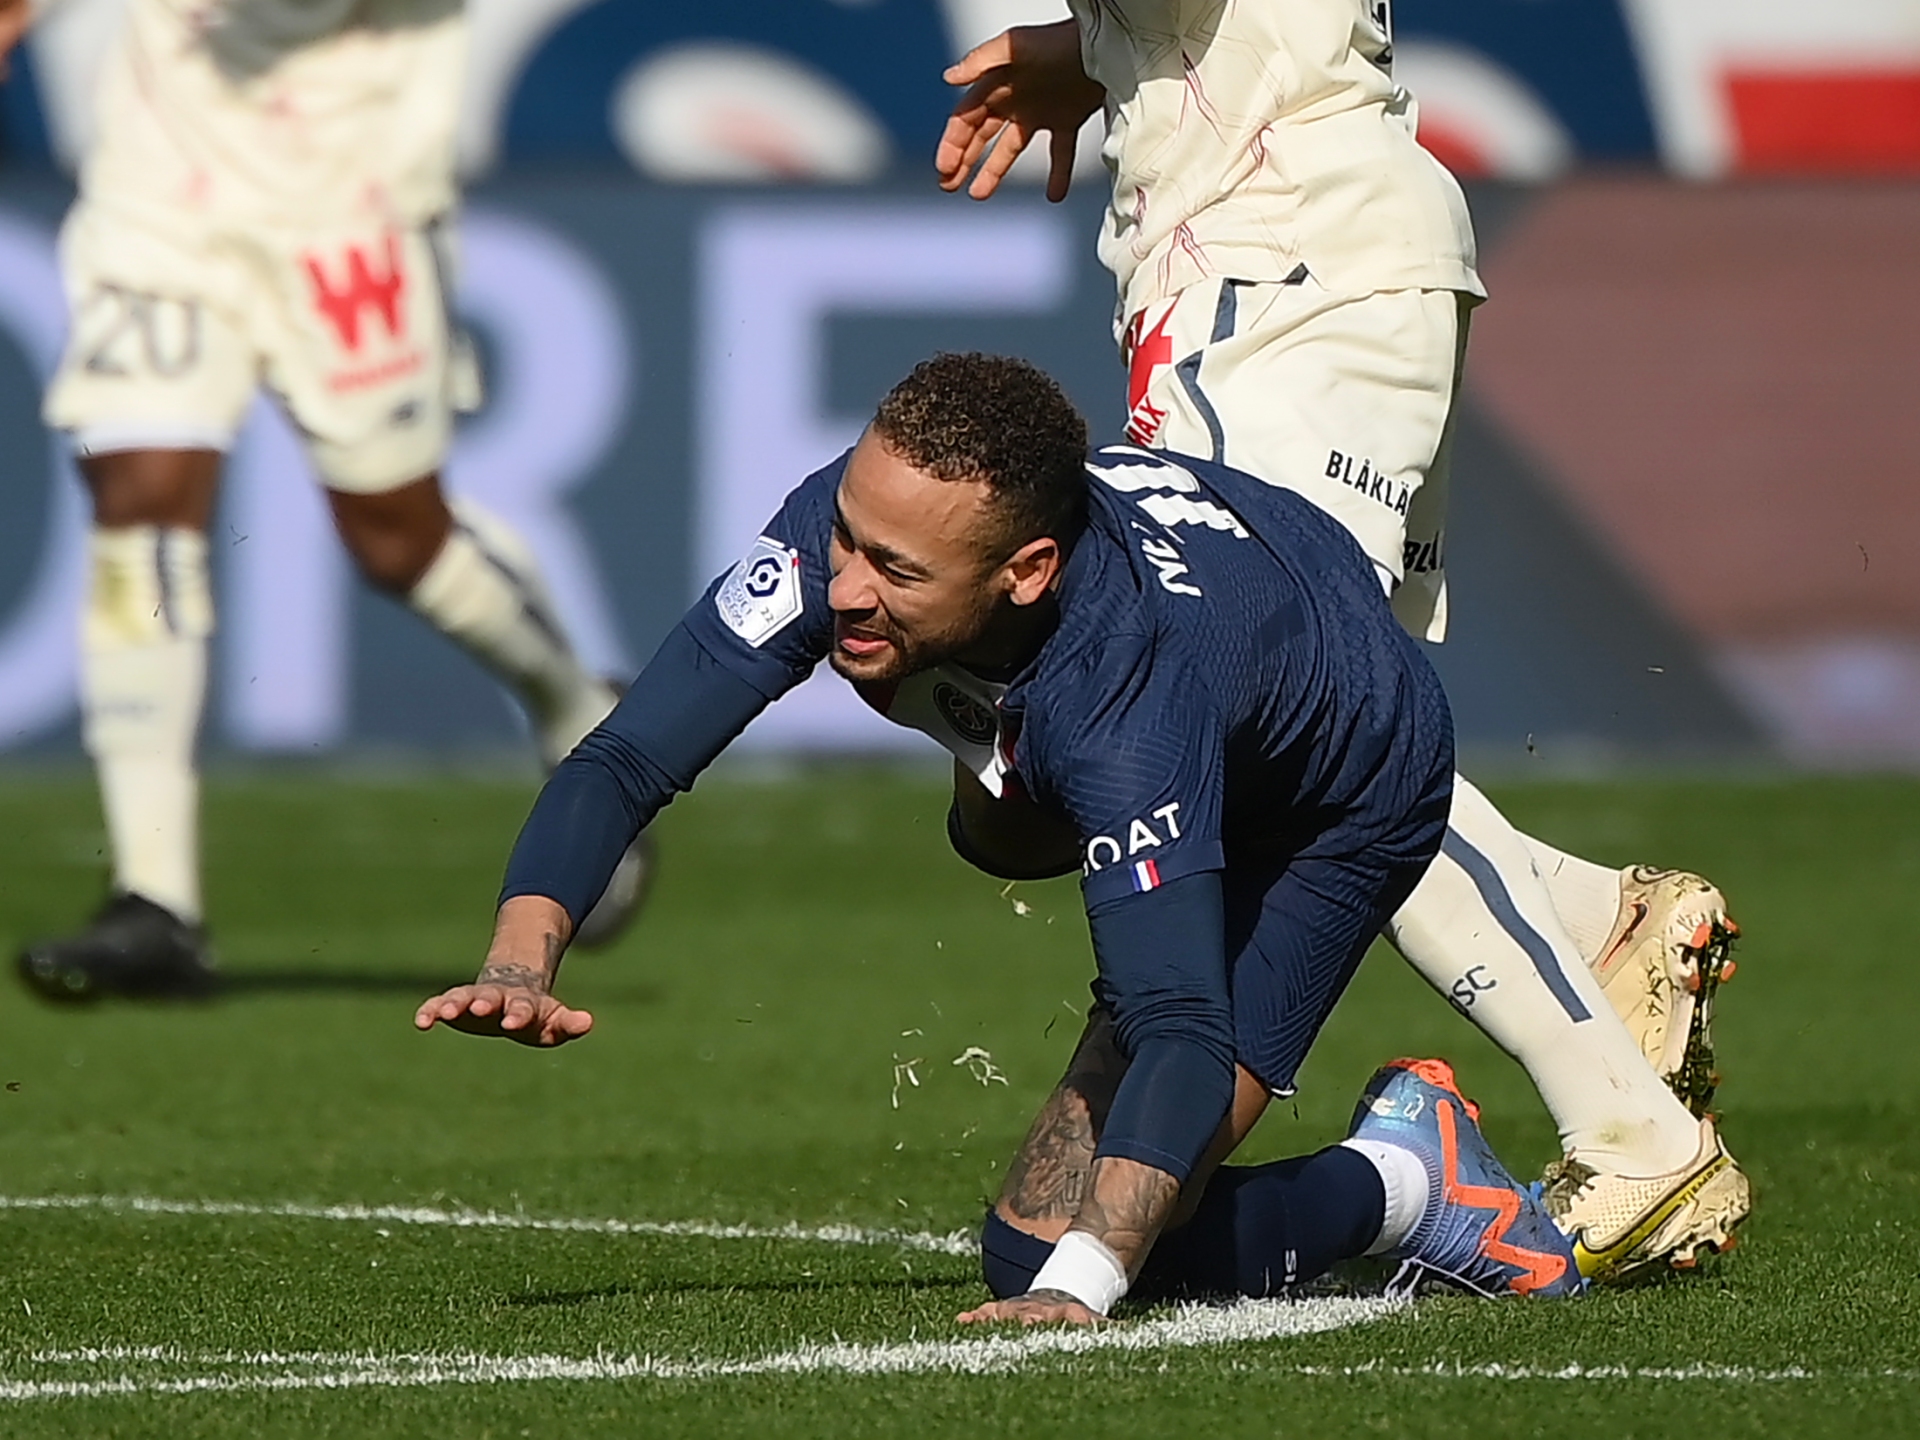 Neymar out for rest of the season due to ankle injury, PSG says